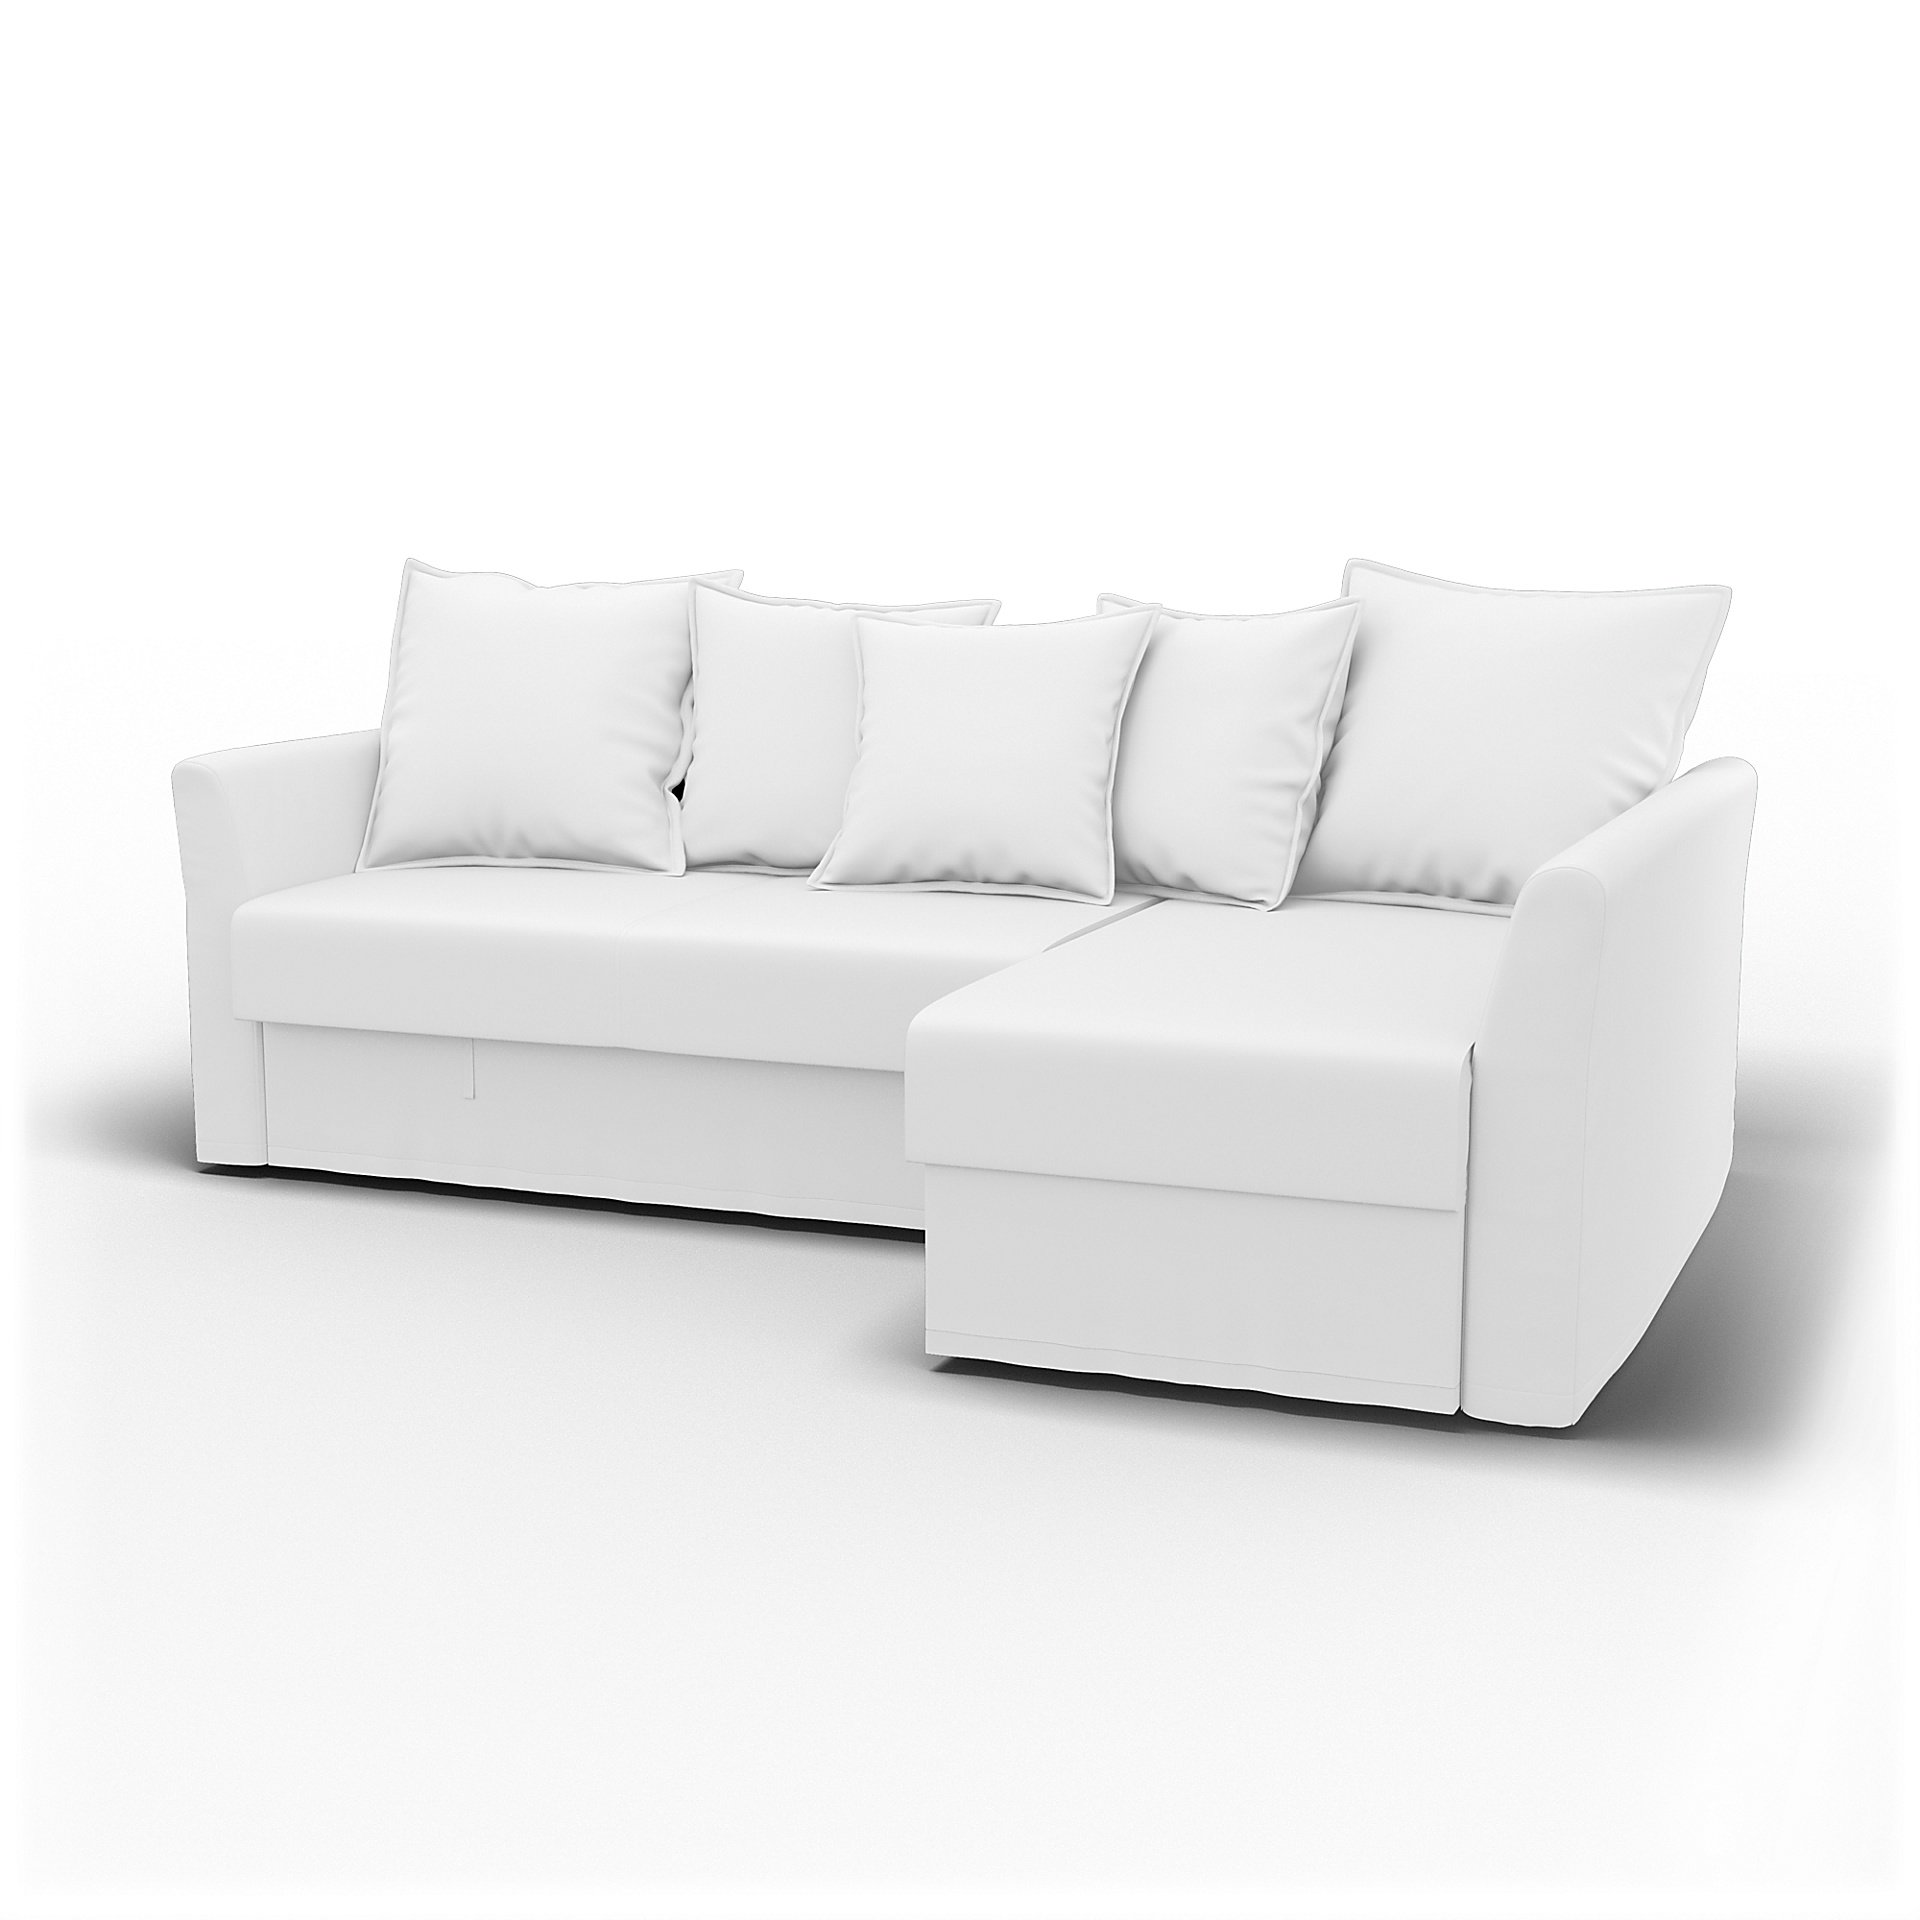 IKEA - Holmsund Sofabed with Chaiselongue, Absolute White, Linen - Bemz